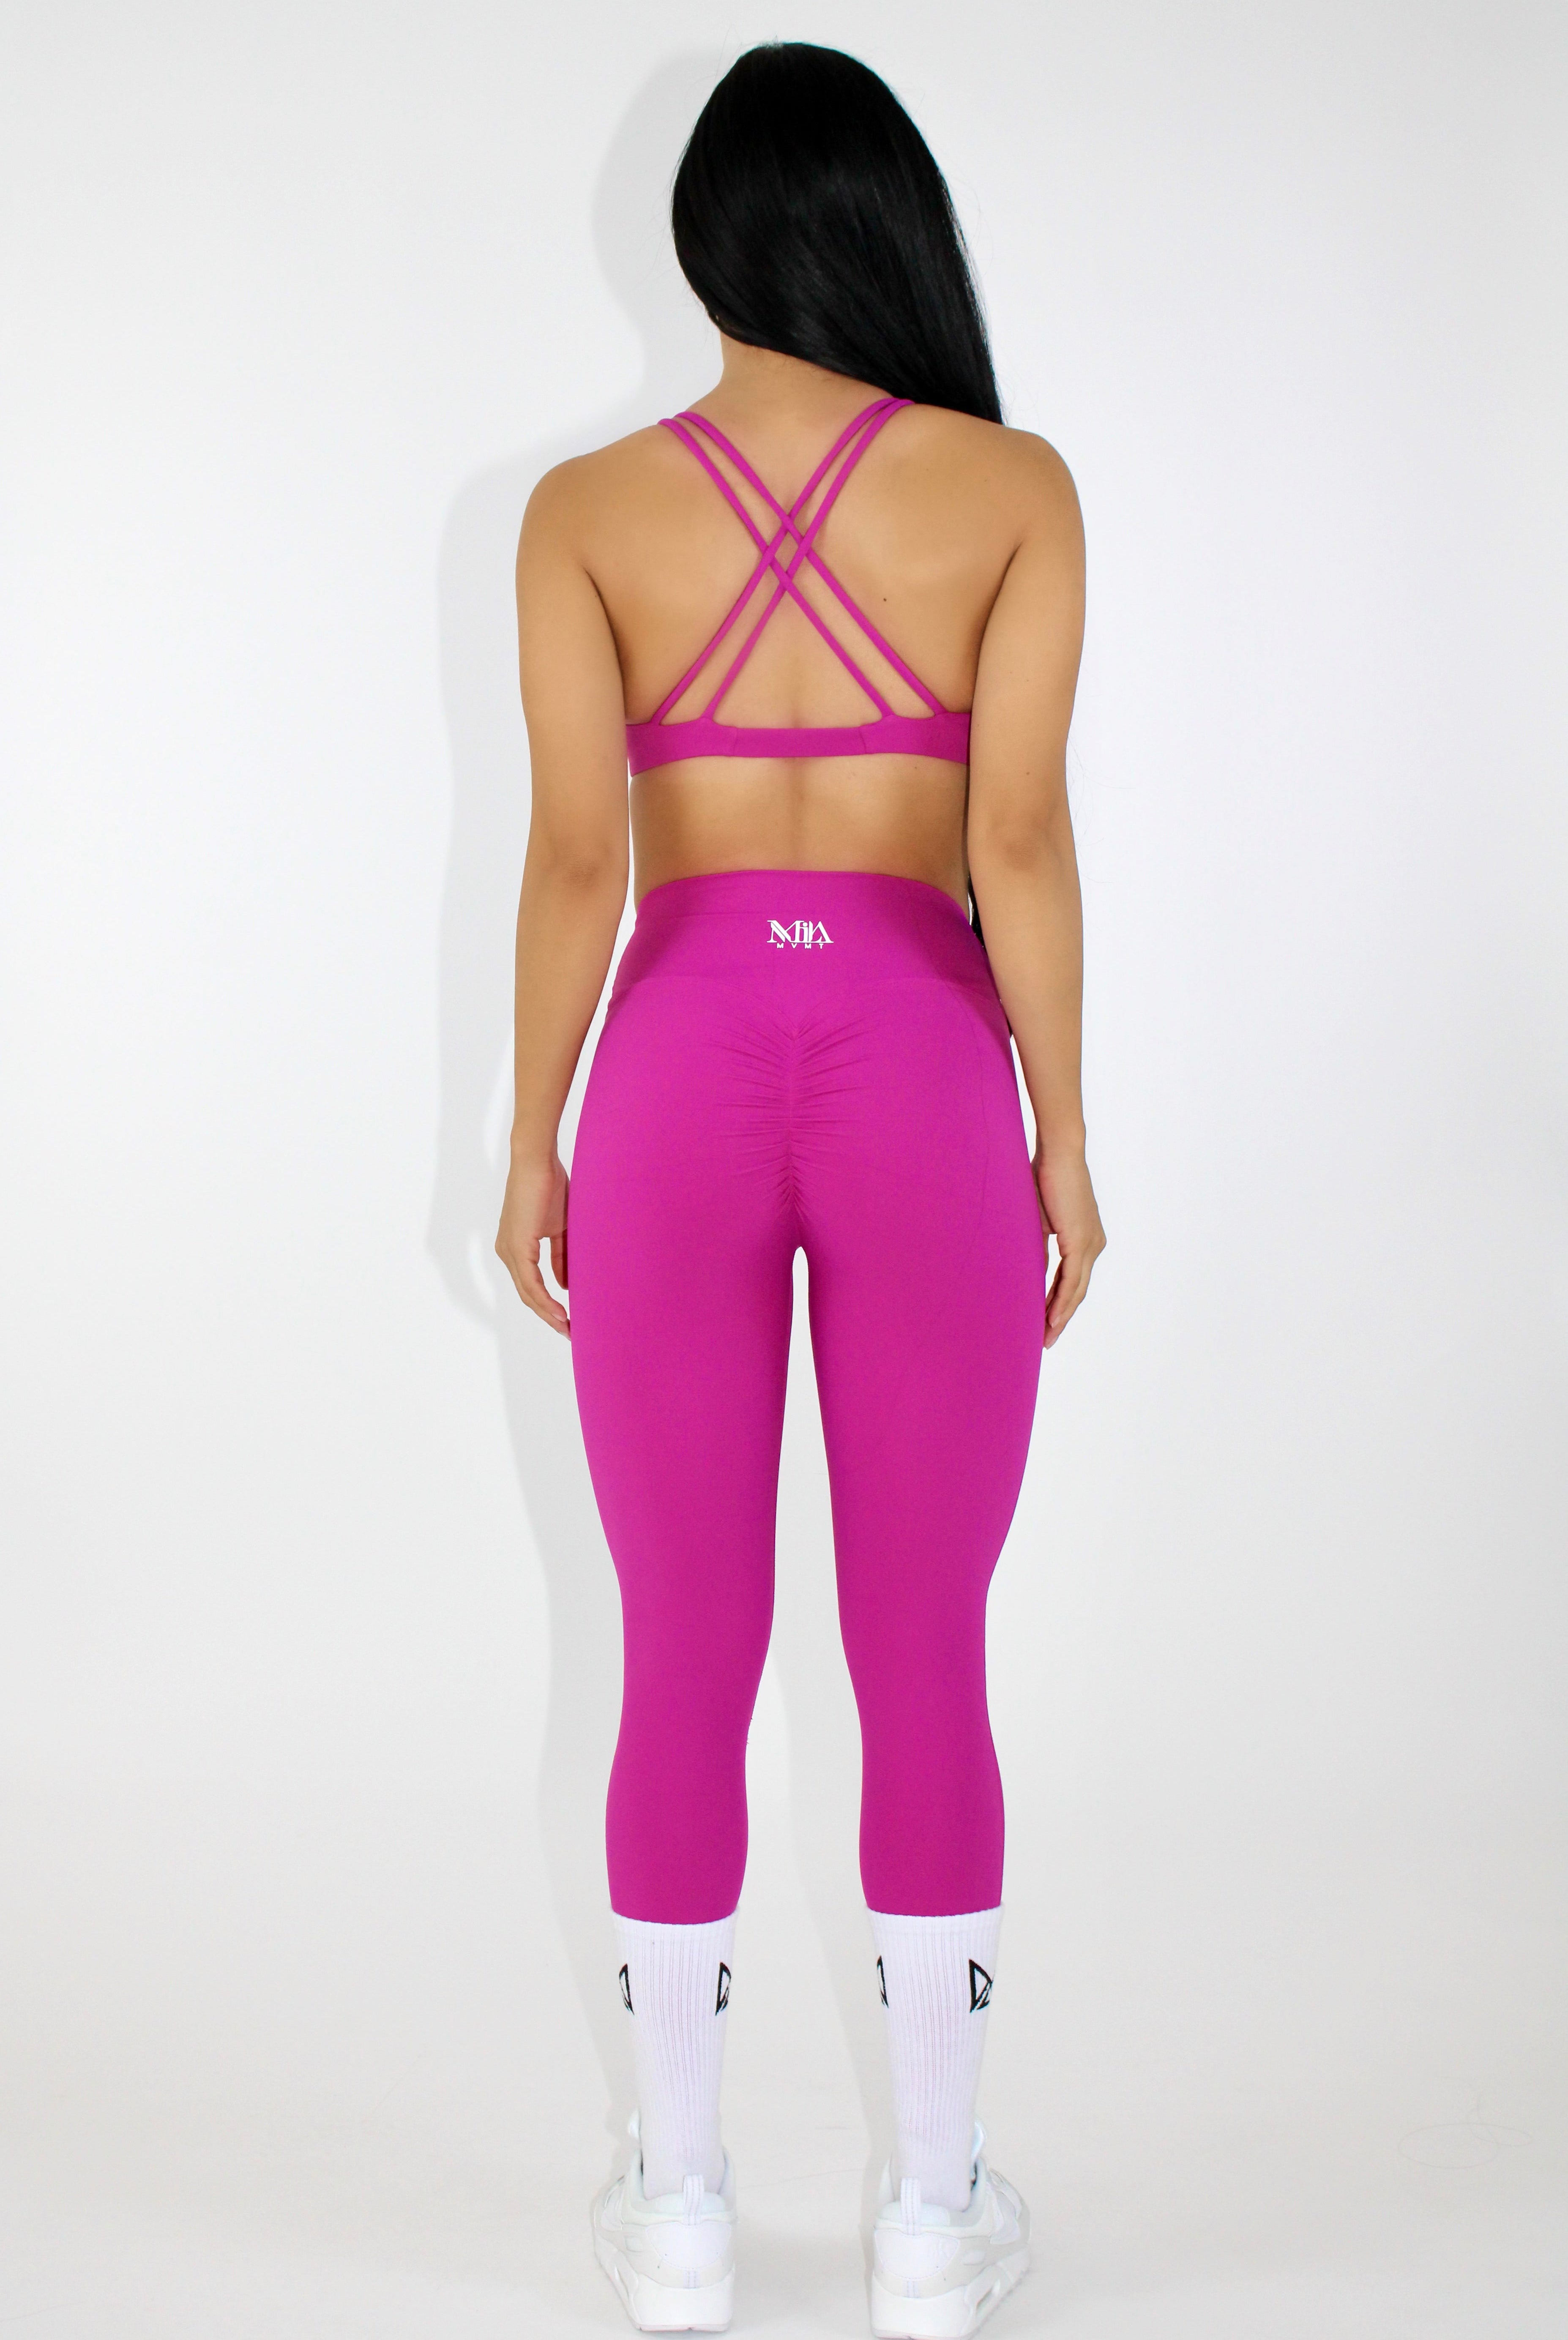 MILA MVMT Sportswear Crossover Buttery Soft Leggings with Scrunch Butt Gym Sets Fuchsia Pink Back View